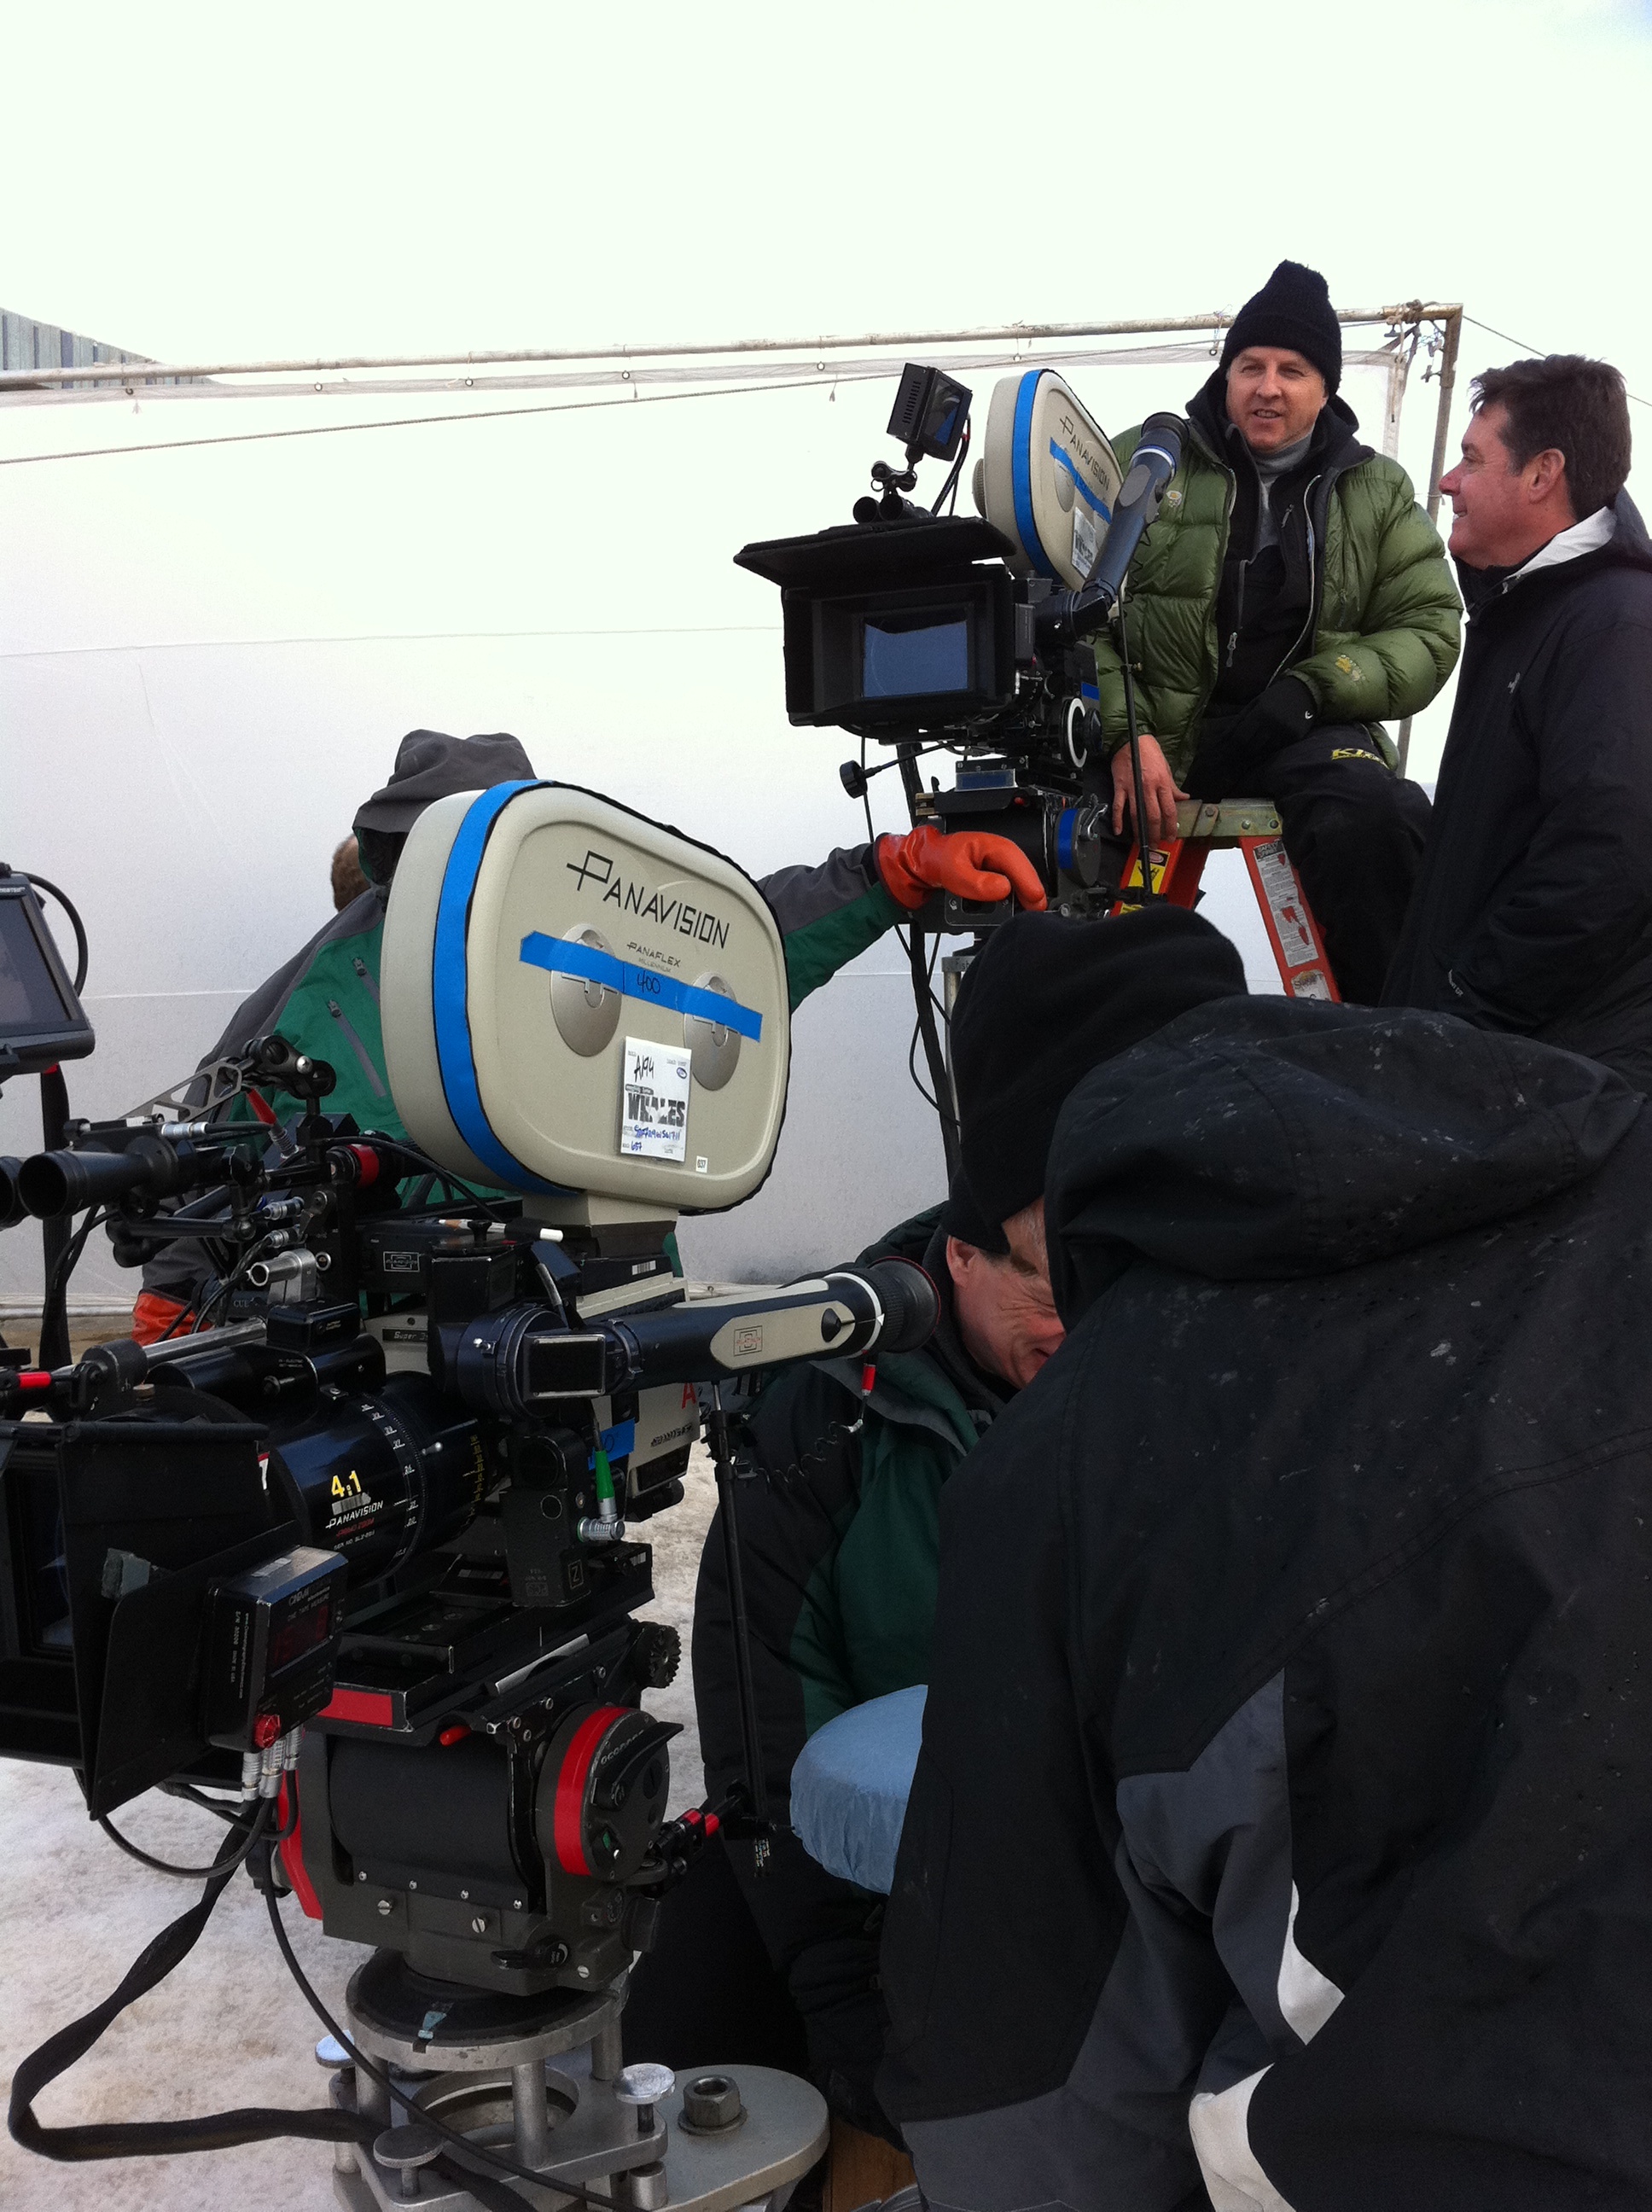 On location in Anchorage, Alaska, the